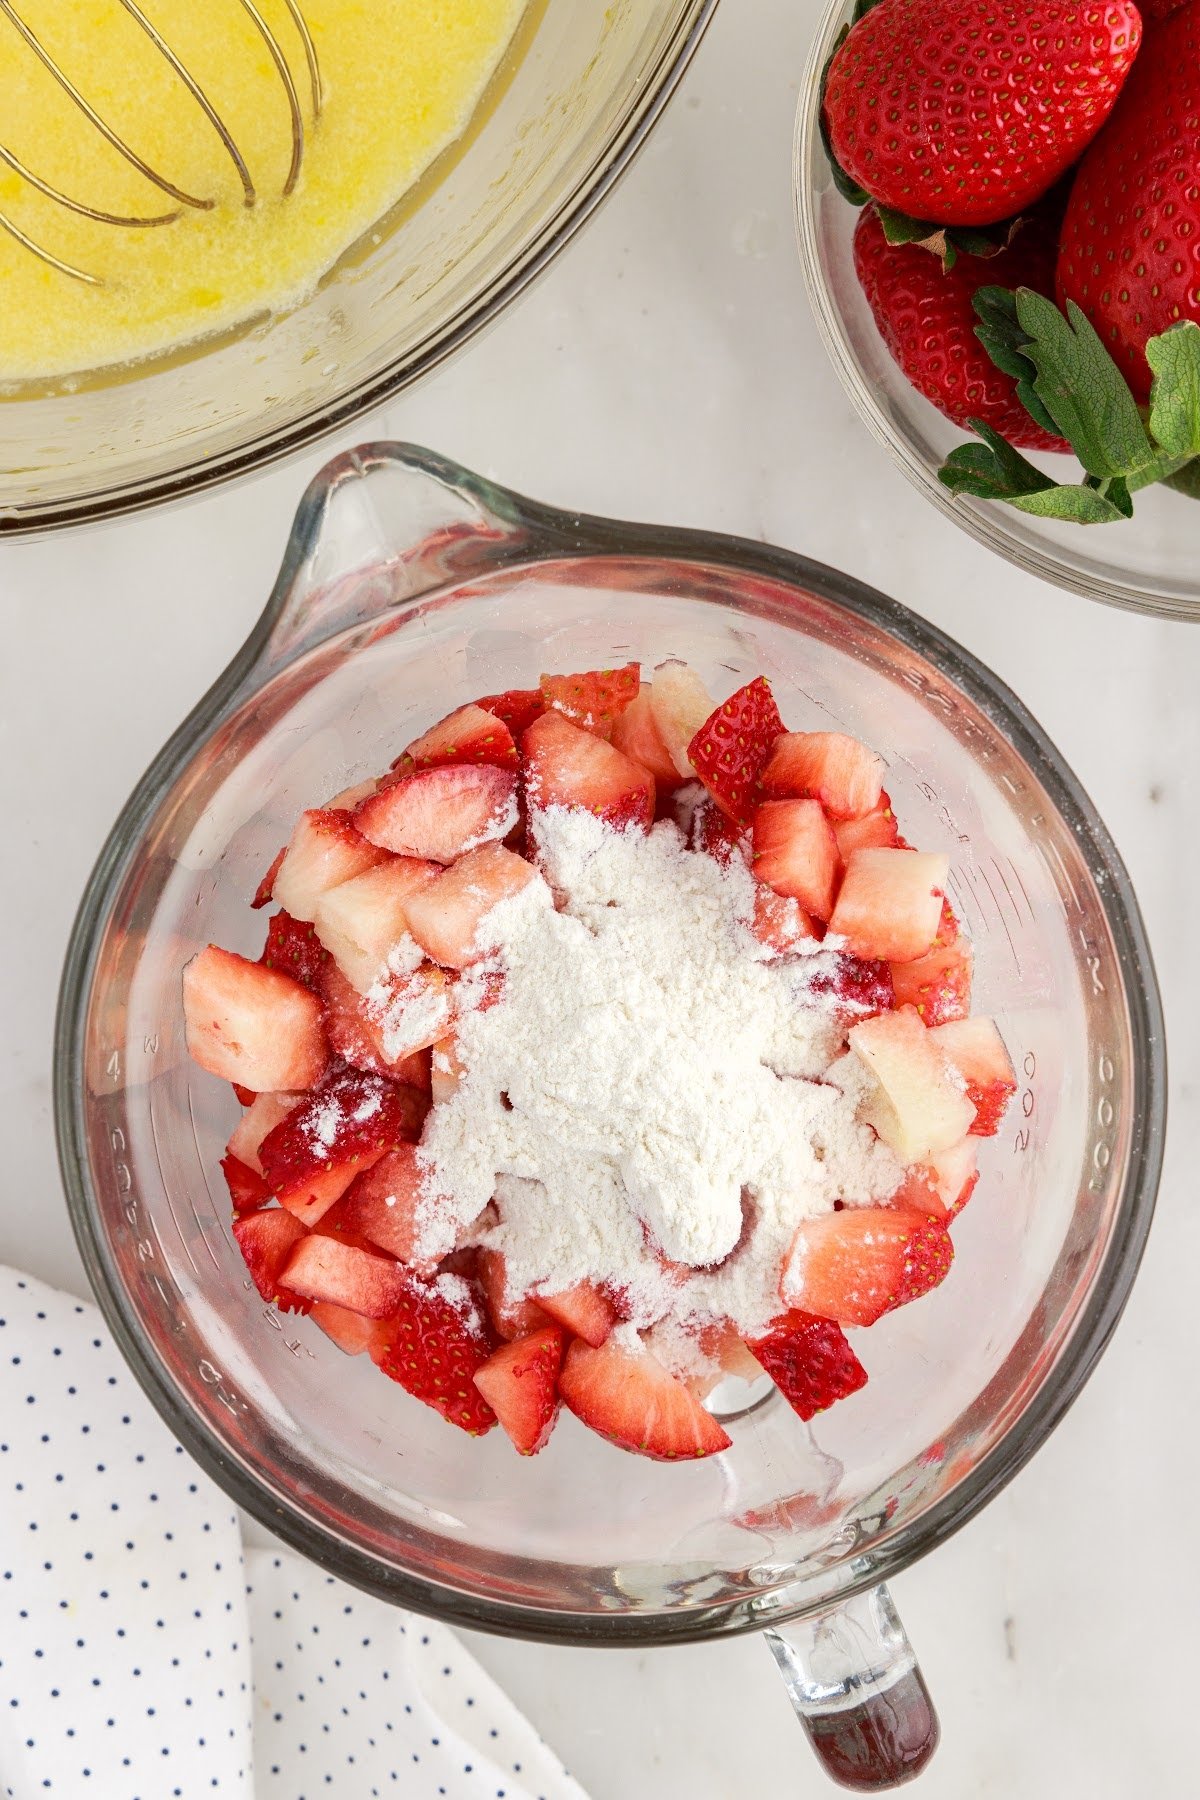 Flour added to strawberries.